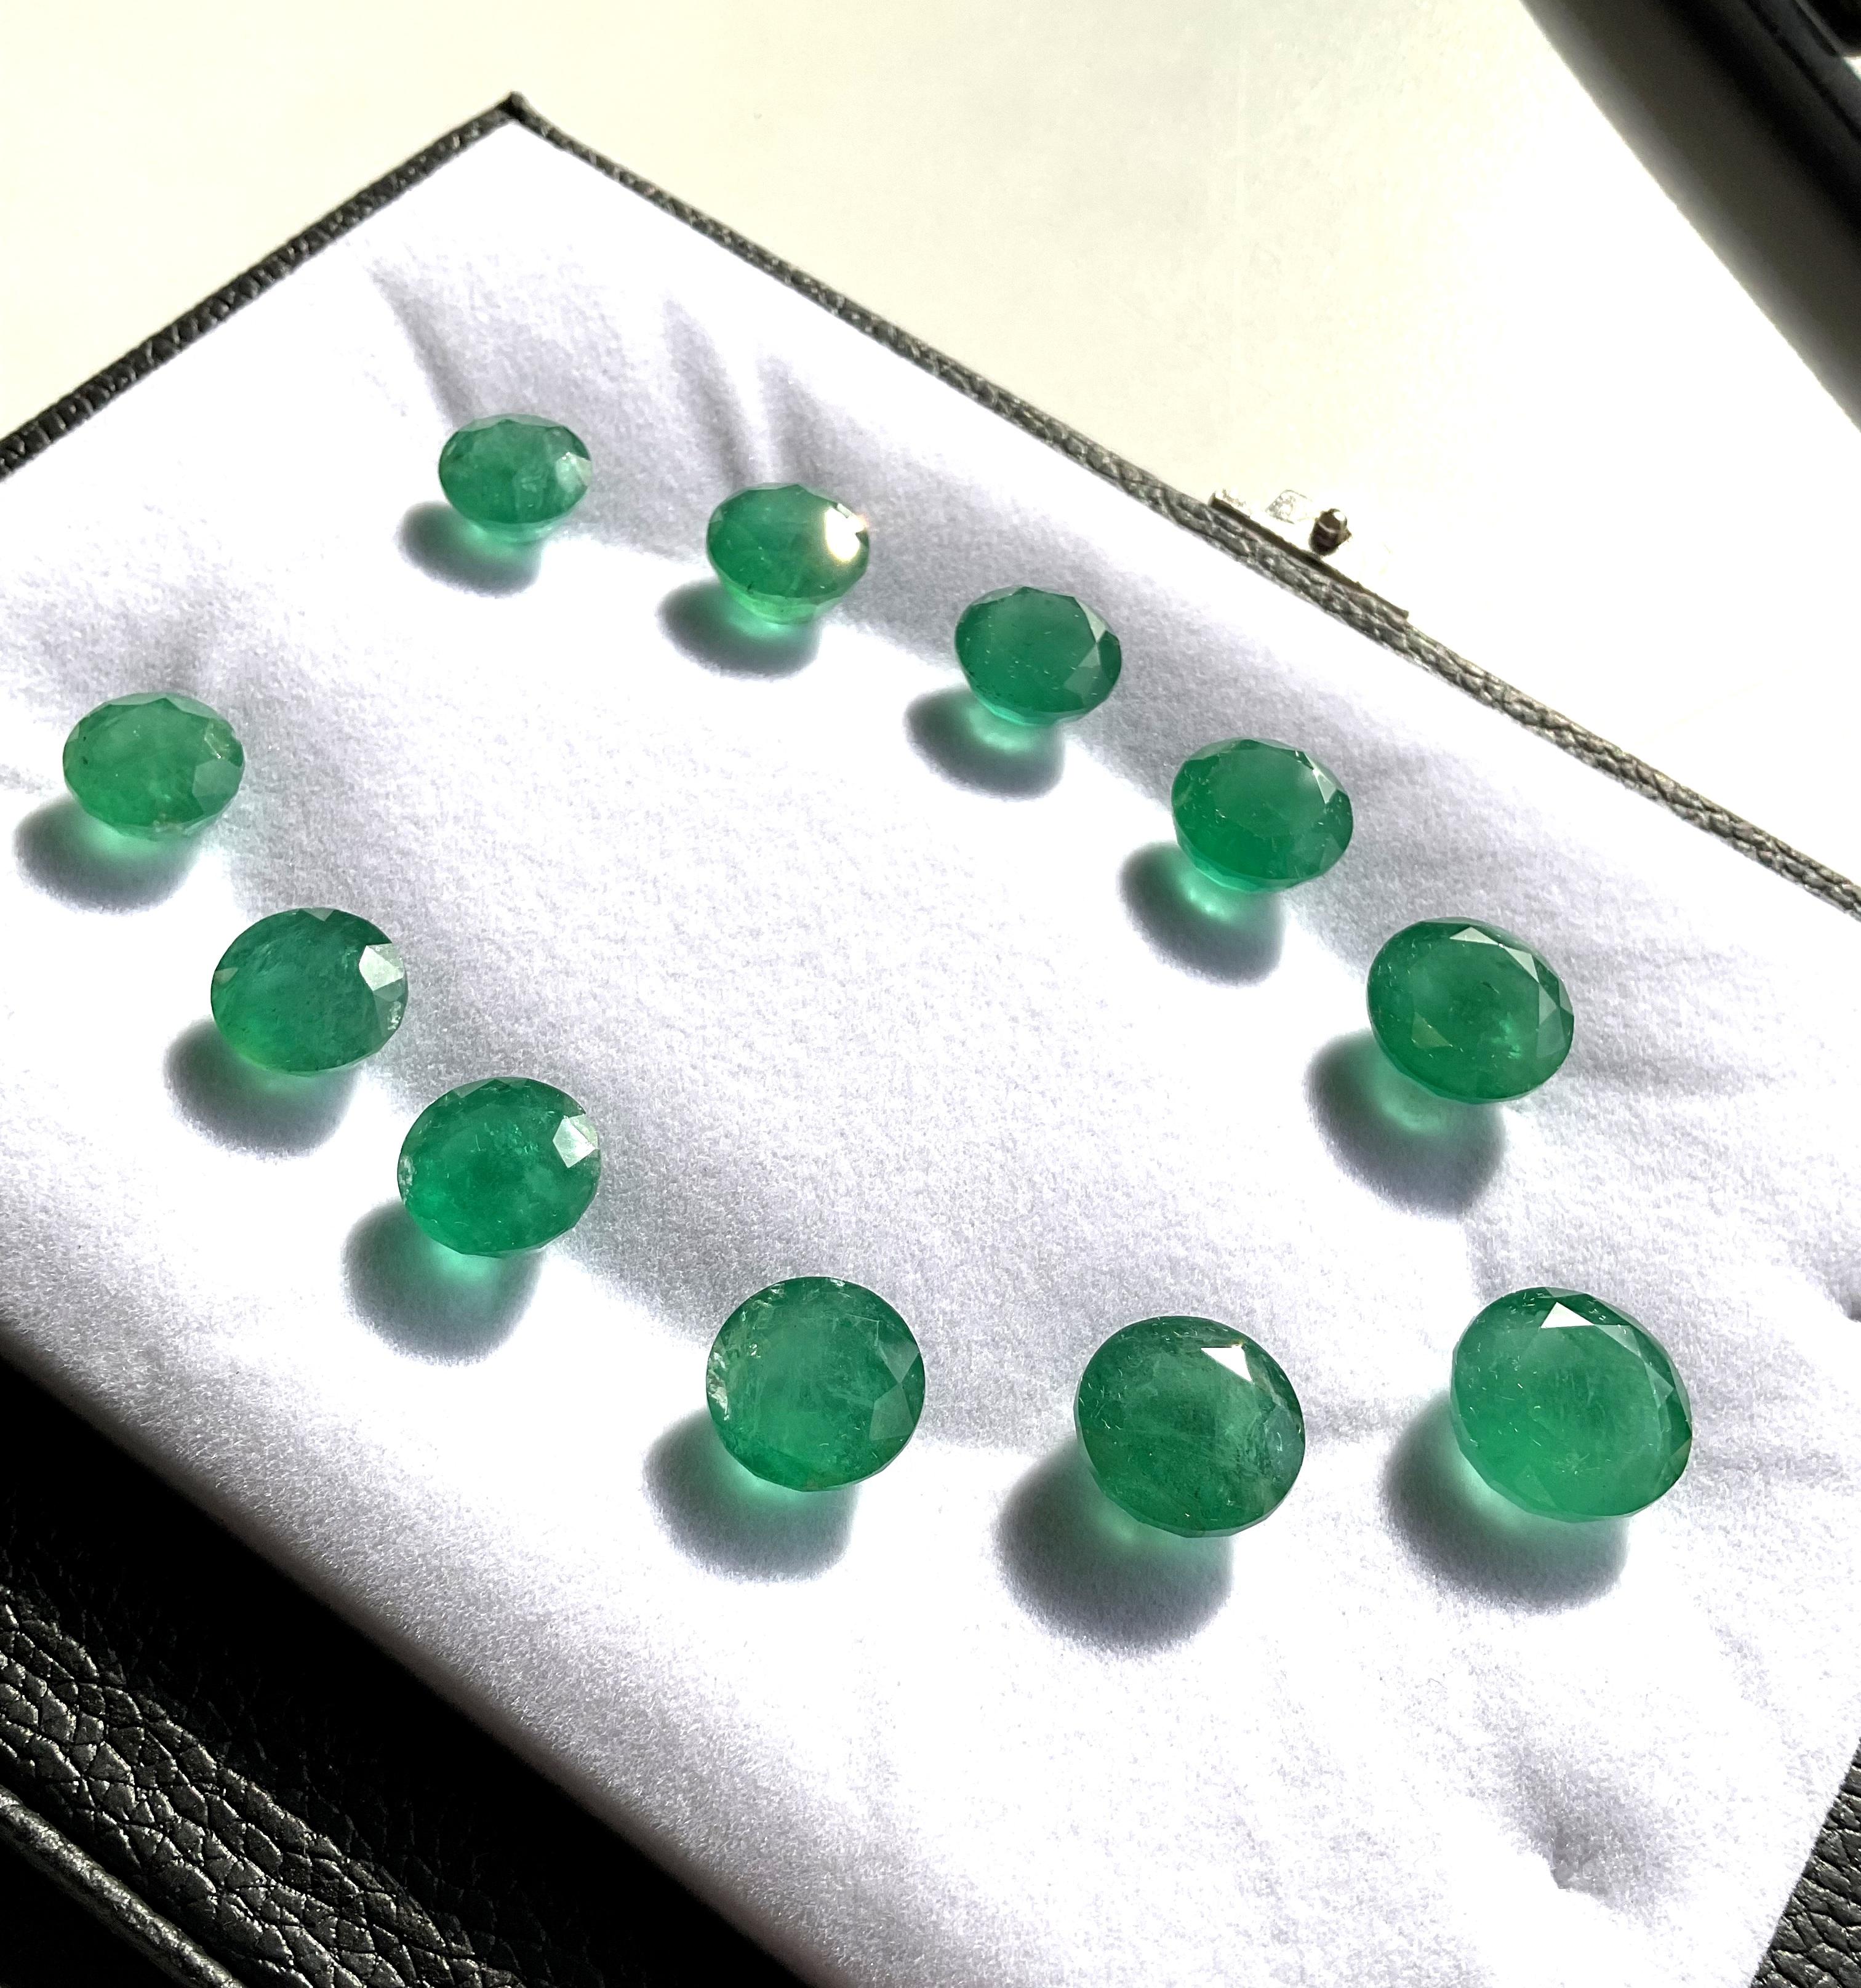 Zambian Emerald Round Faceted Cut stones
Weight: 103.48 Carats
Size: 10 To 15 MM
Quantity: 11 Pieces
Shape: Round 